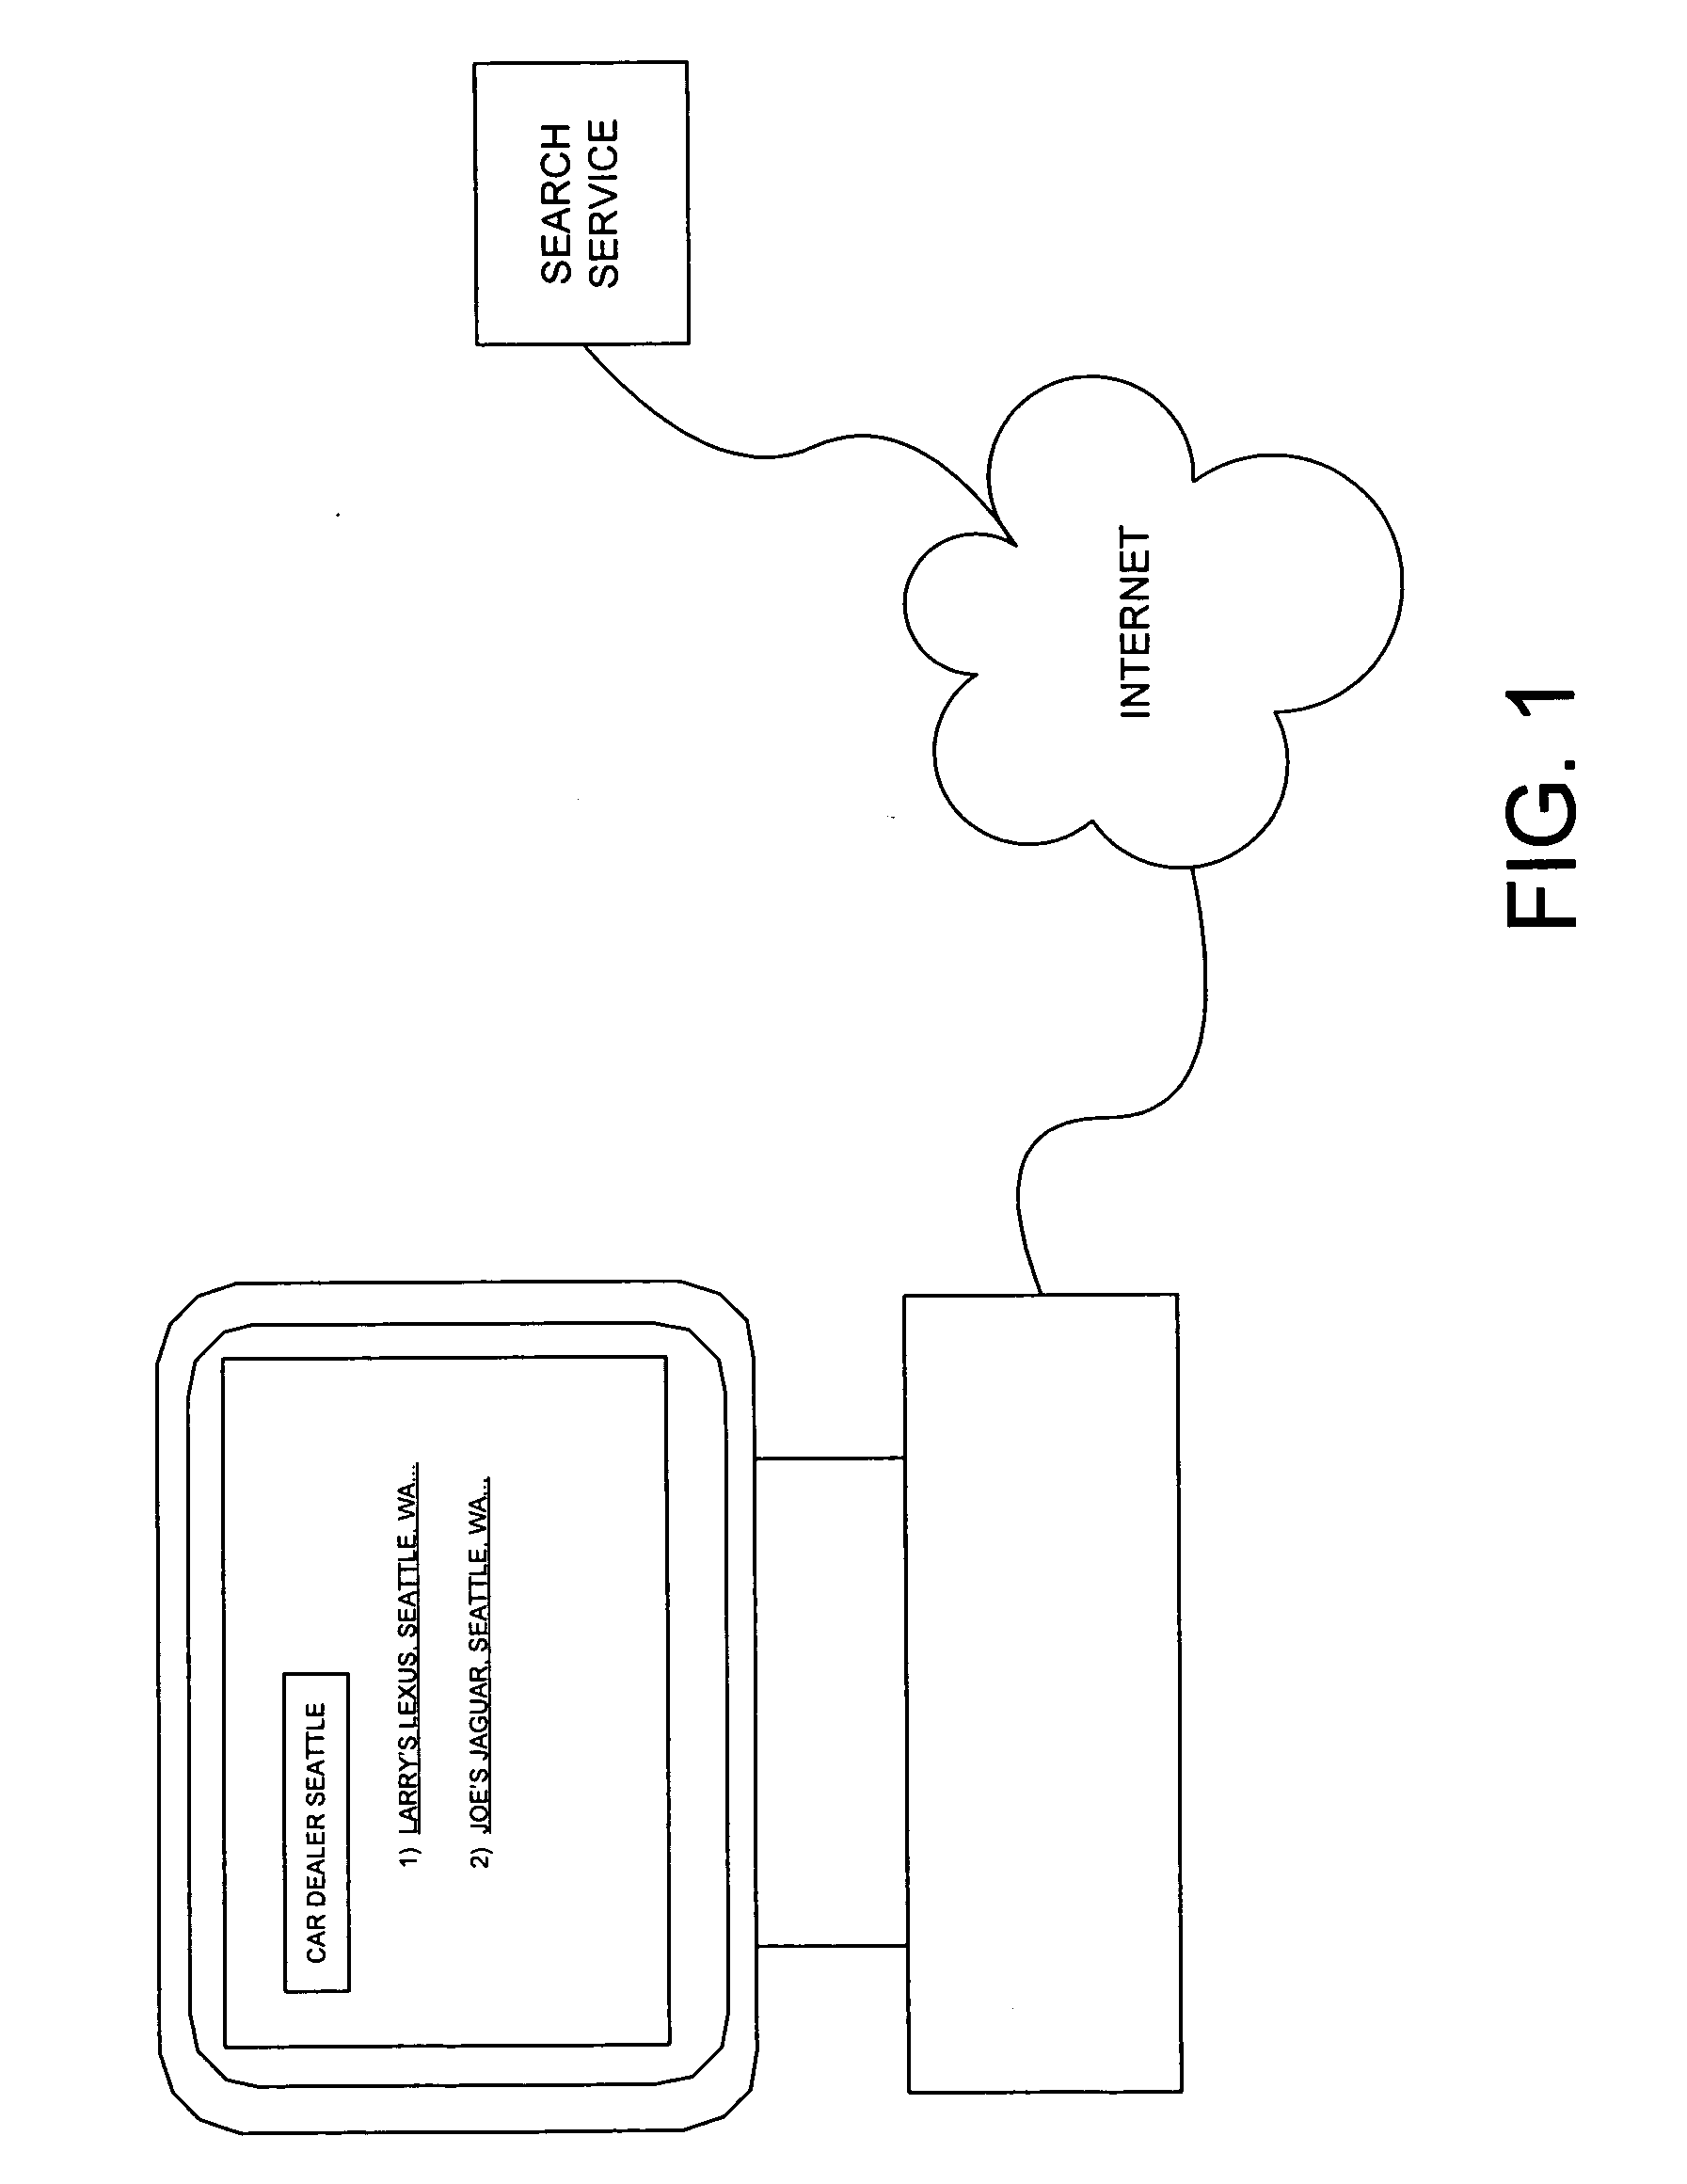 System and method for generating attribute-based selectable search extension